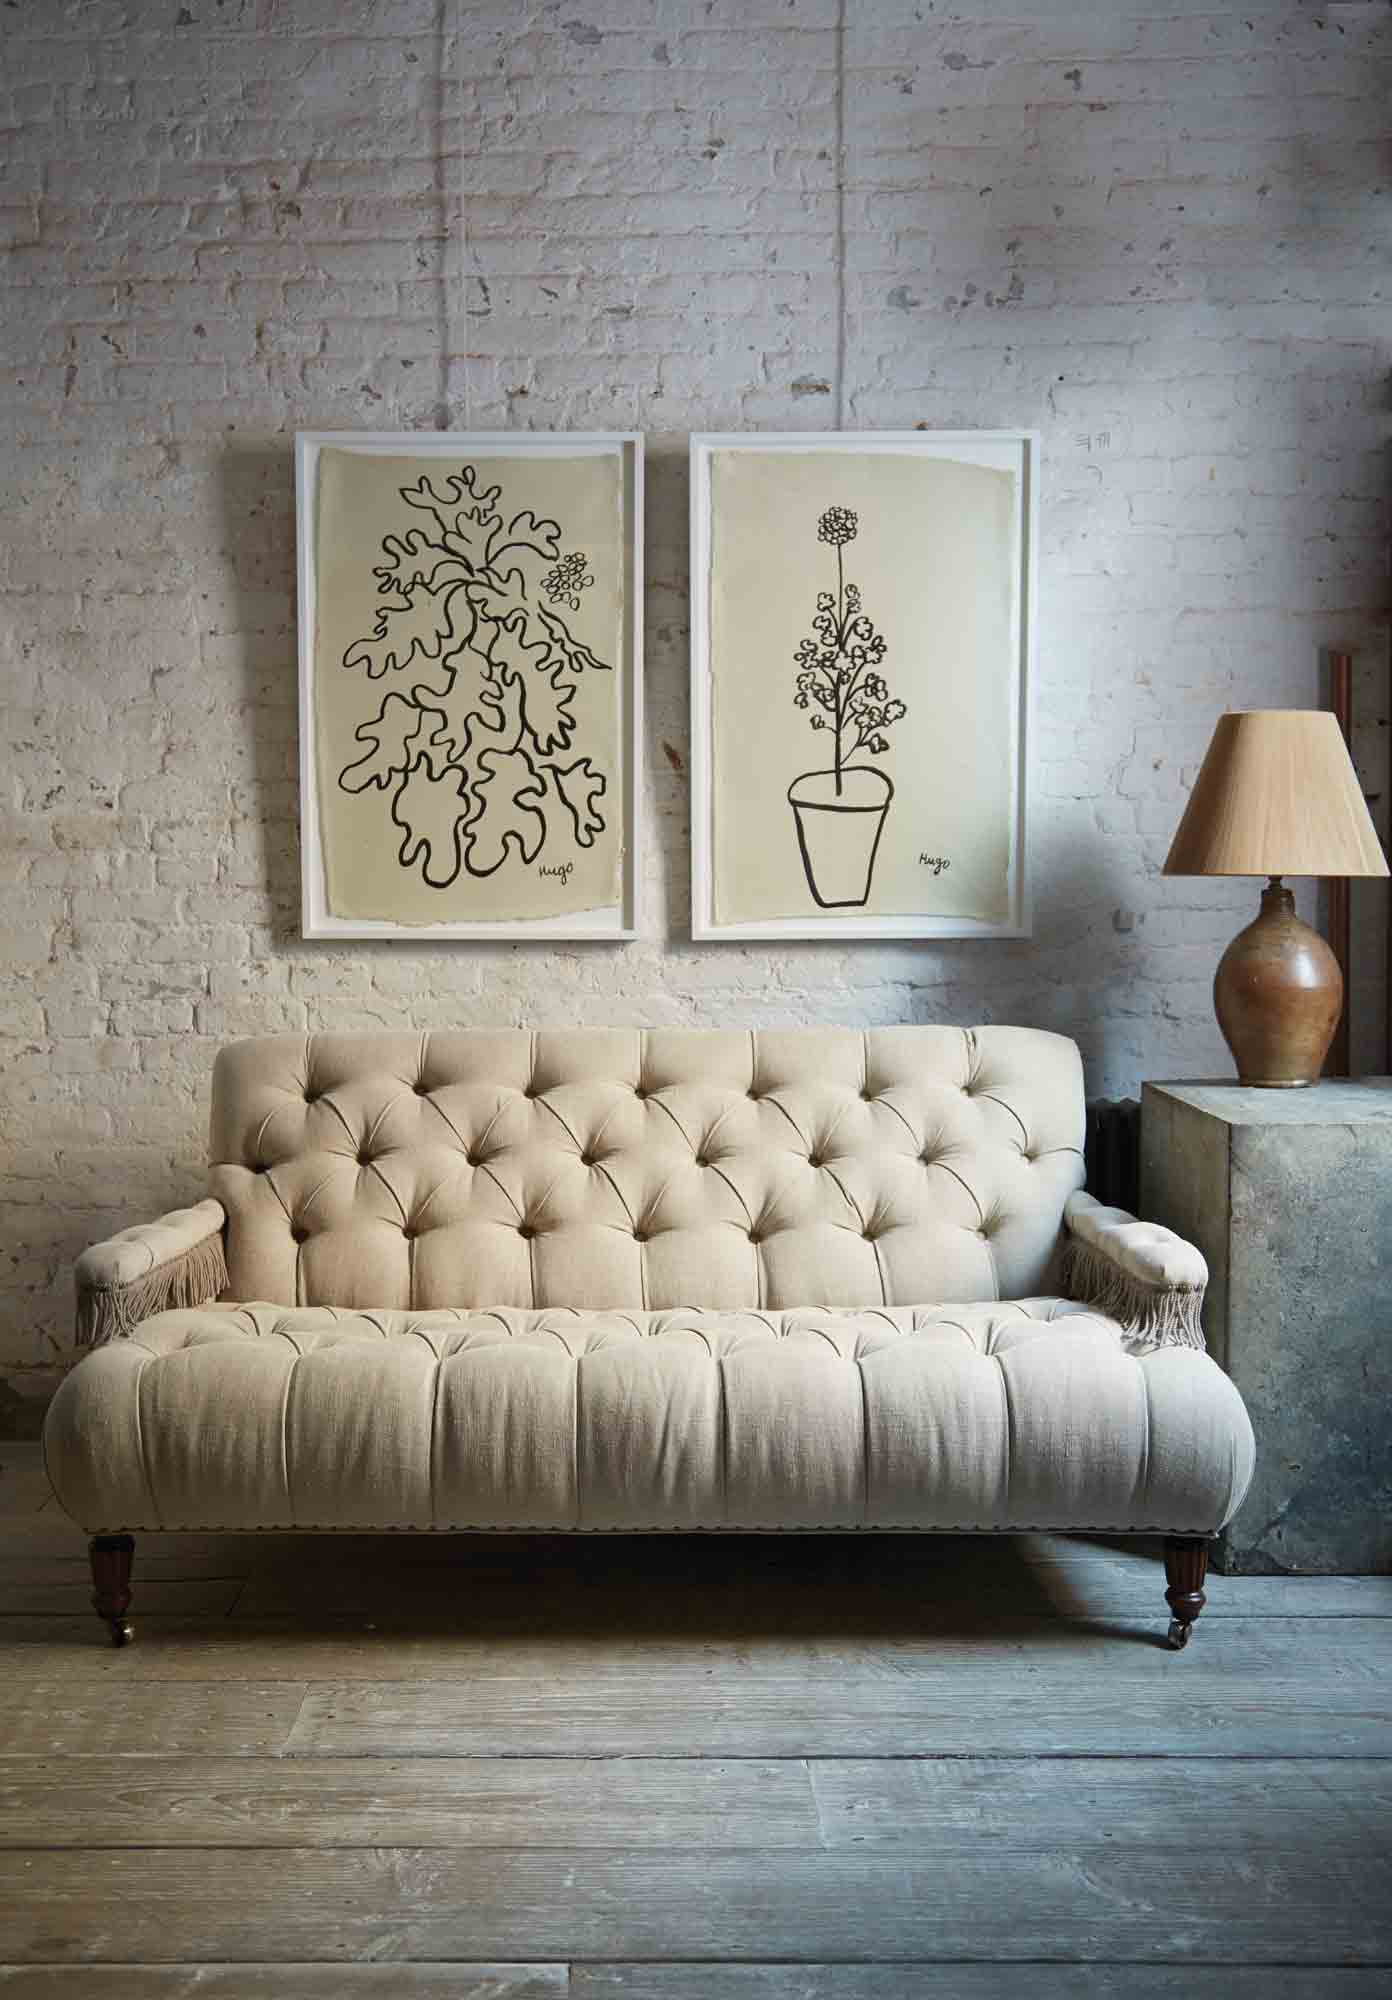  Tufted small scale sofa in a natural Vintage Flax linen with fringes on the arm rests. It is in a room wit daylight and a white brick wall and a wood floor. There are 2 pictures hanging on the wall and a table lamp on the right side. Photographed in Vintage Flax. 